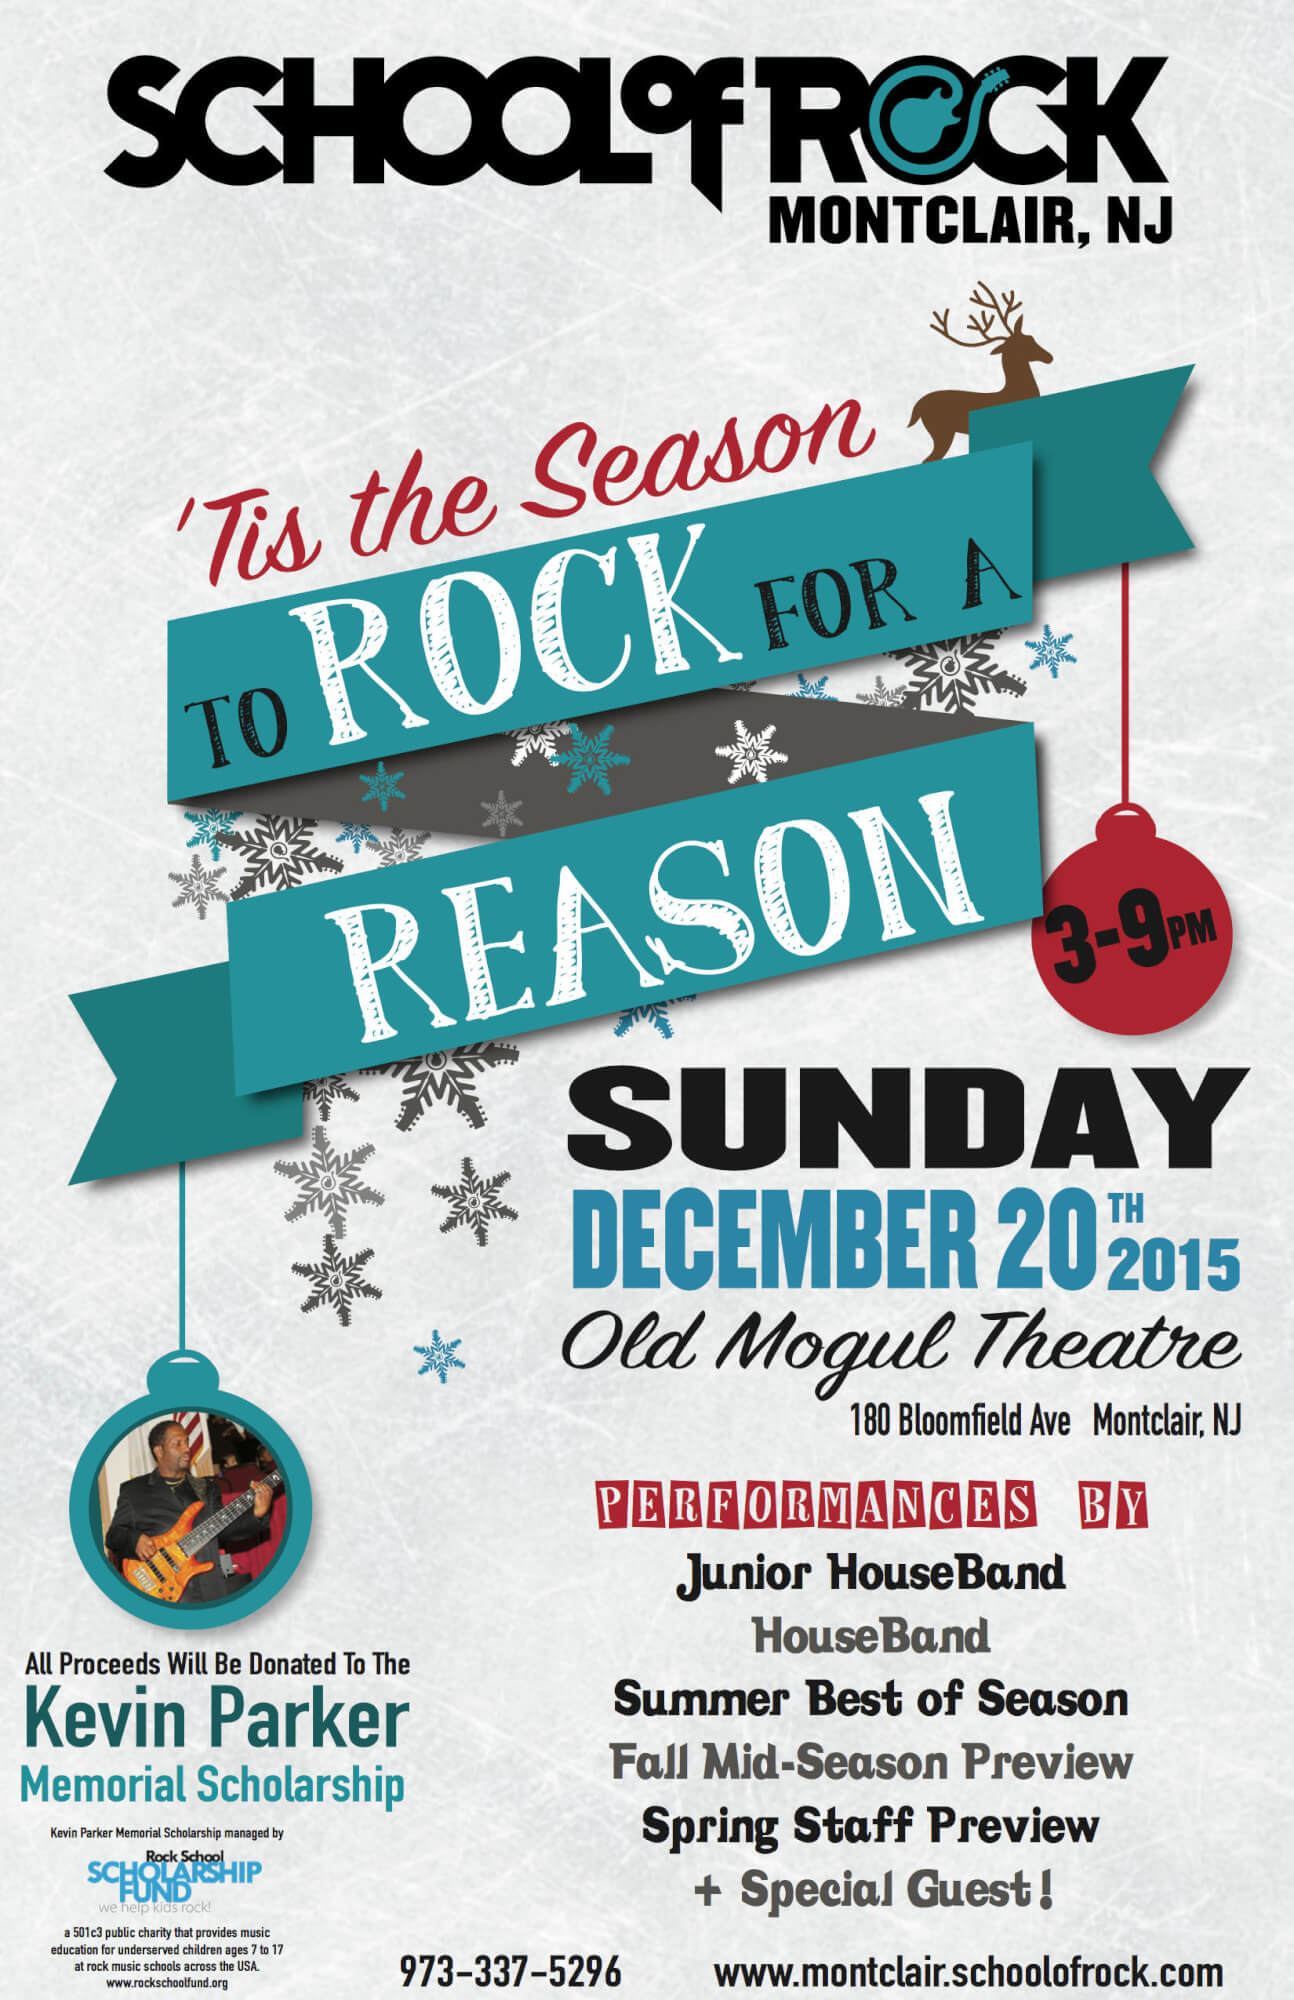 Tis the season to ROCK for a Reason Sunday, December 20th 3-9pm at Old Mogul Theatre